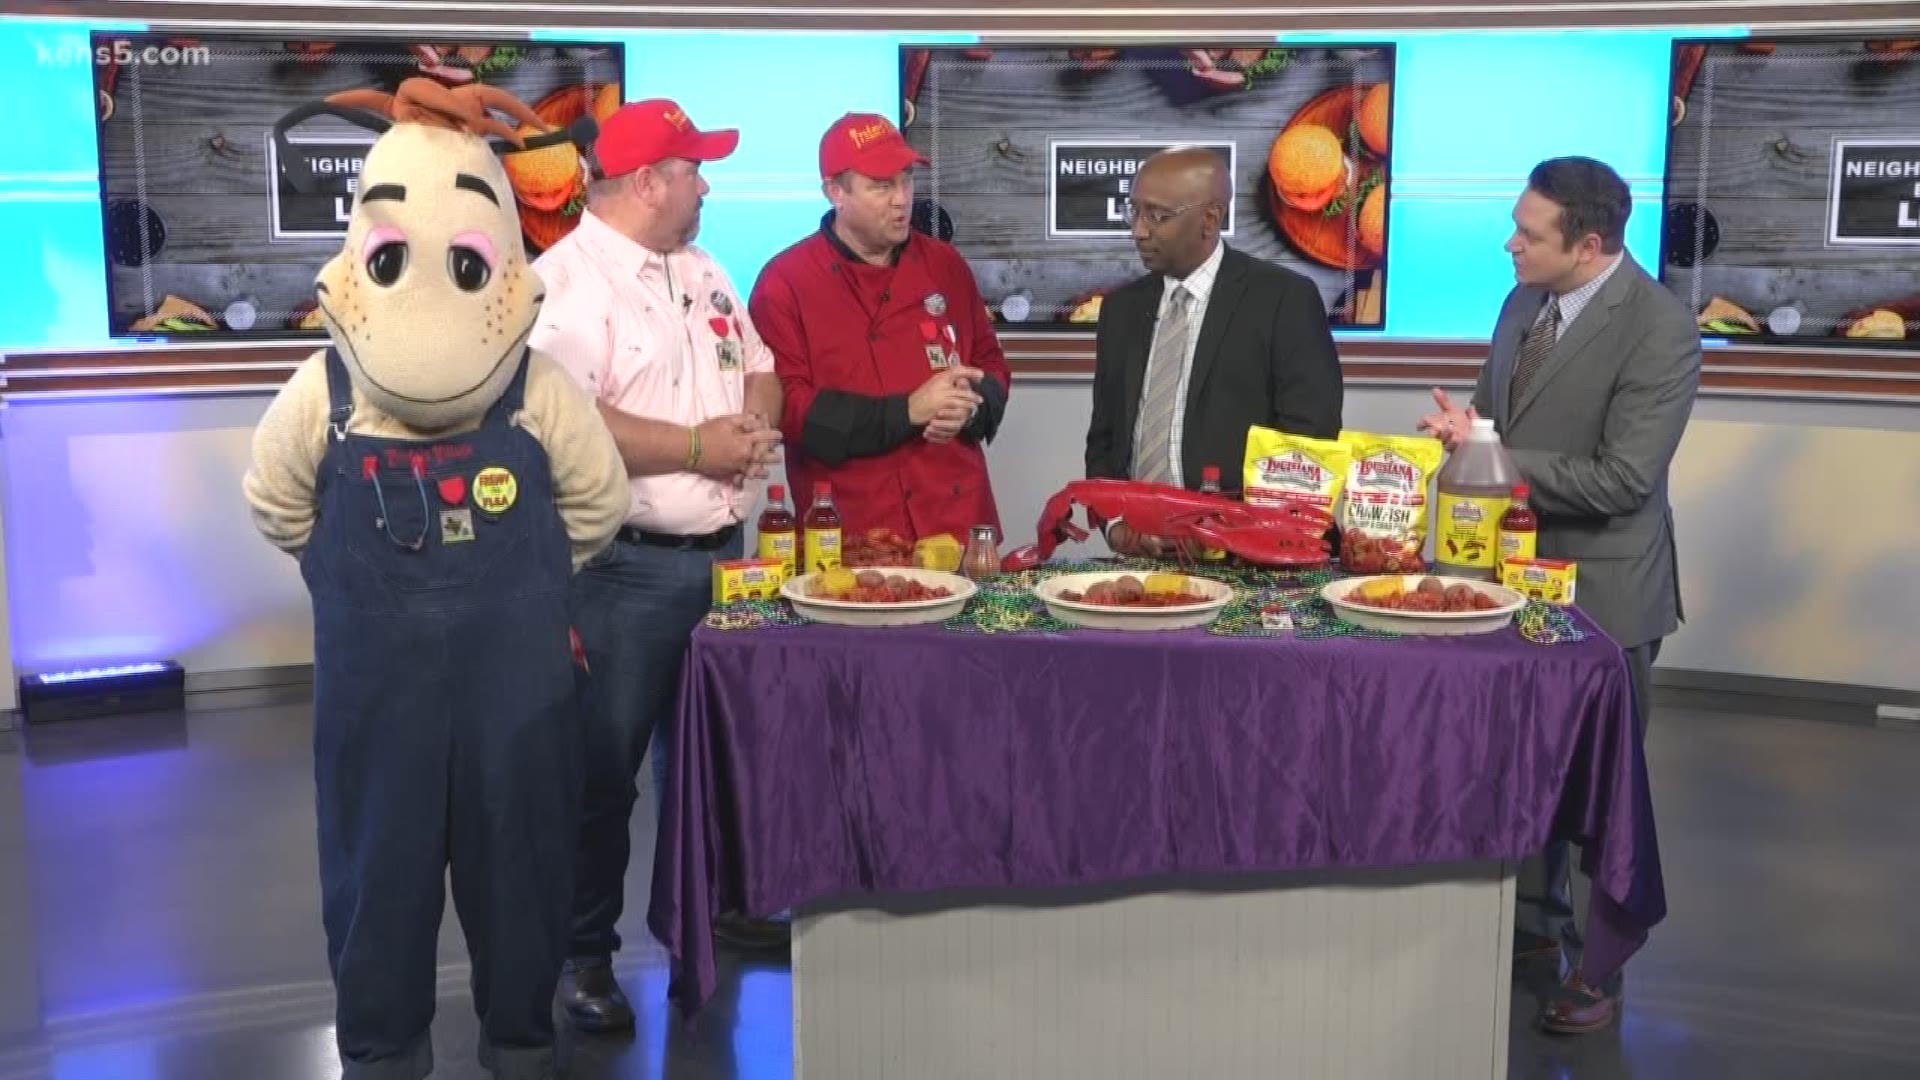 Brian Billec and Mark Davis share more on what you can expect from the two-day Cajun Festival next weekend, April 27-28.